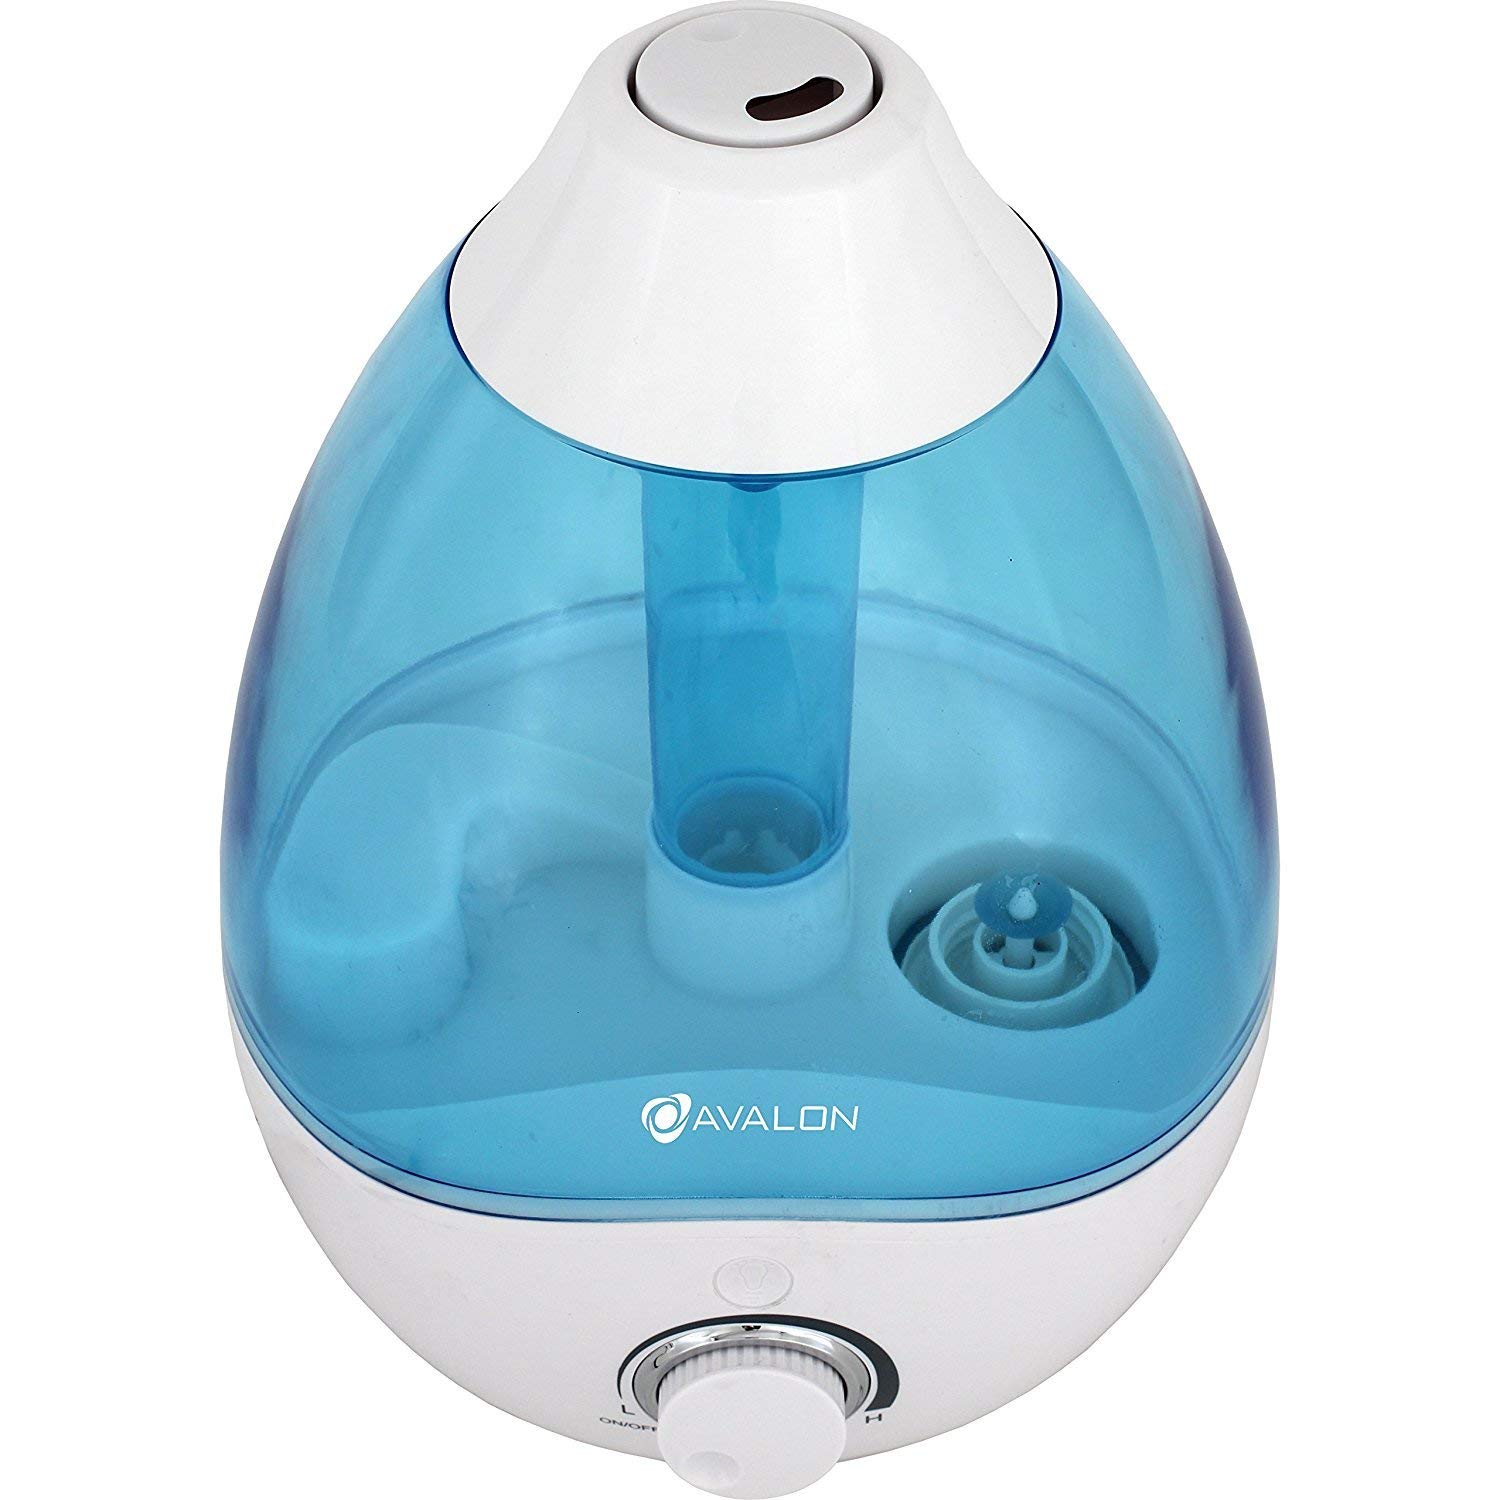 Avalon Cool Mist Humidifier with Essential Oil Drop Diffuser Only $13.09! (Reg $39.99)